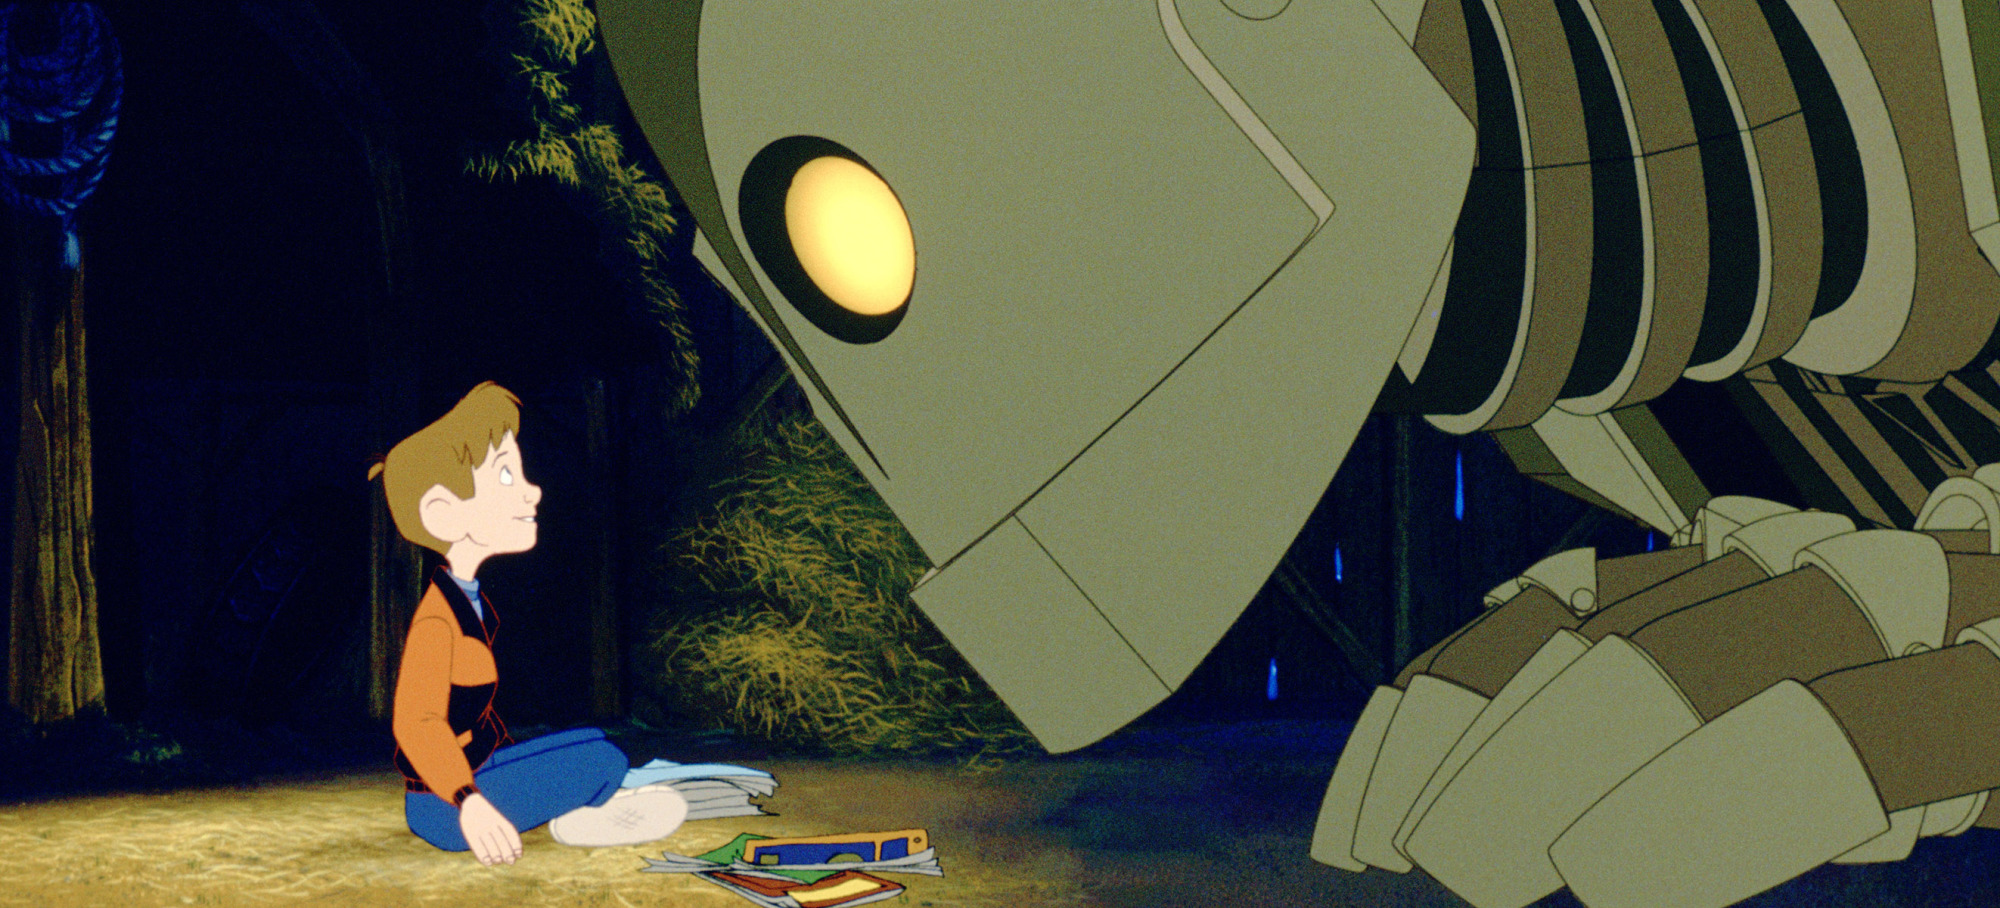 Vin Diesel and Eli Marienthal in The Iron Giant (1999)